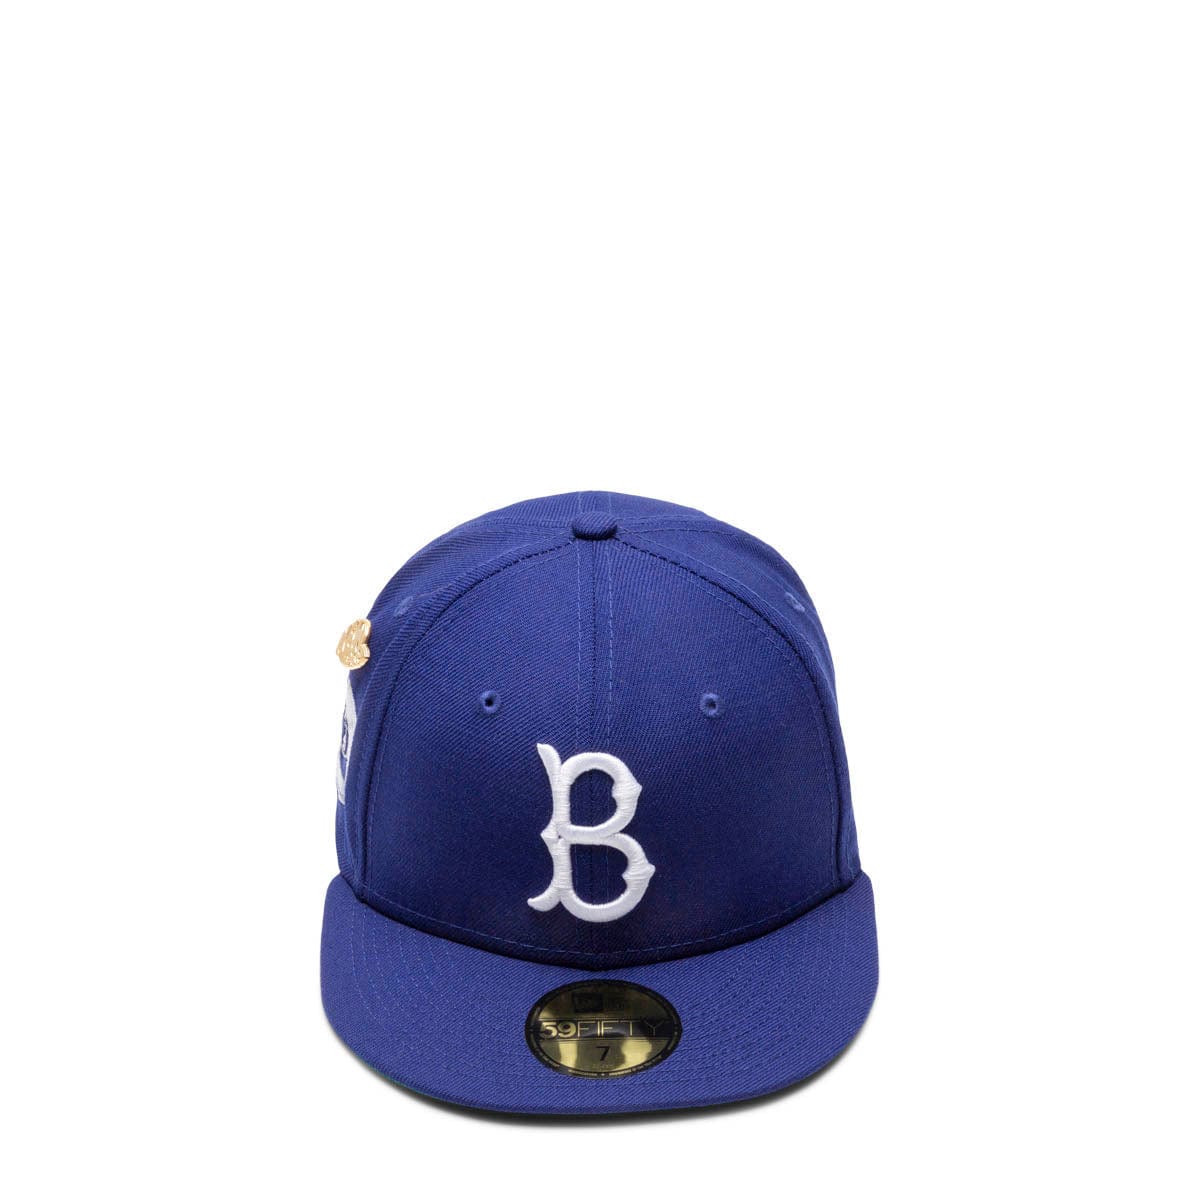 New Era 59FIFTY BROOKLYN DODGERS (1955) LOGO HISTORY FITTED CAP ROYAL BLUE